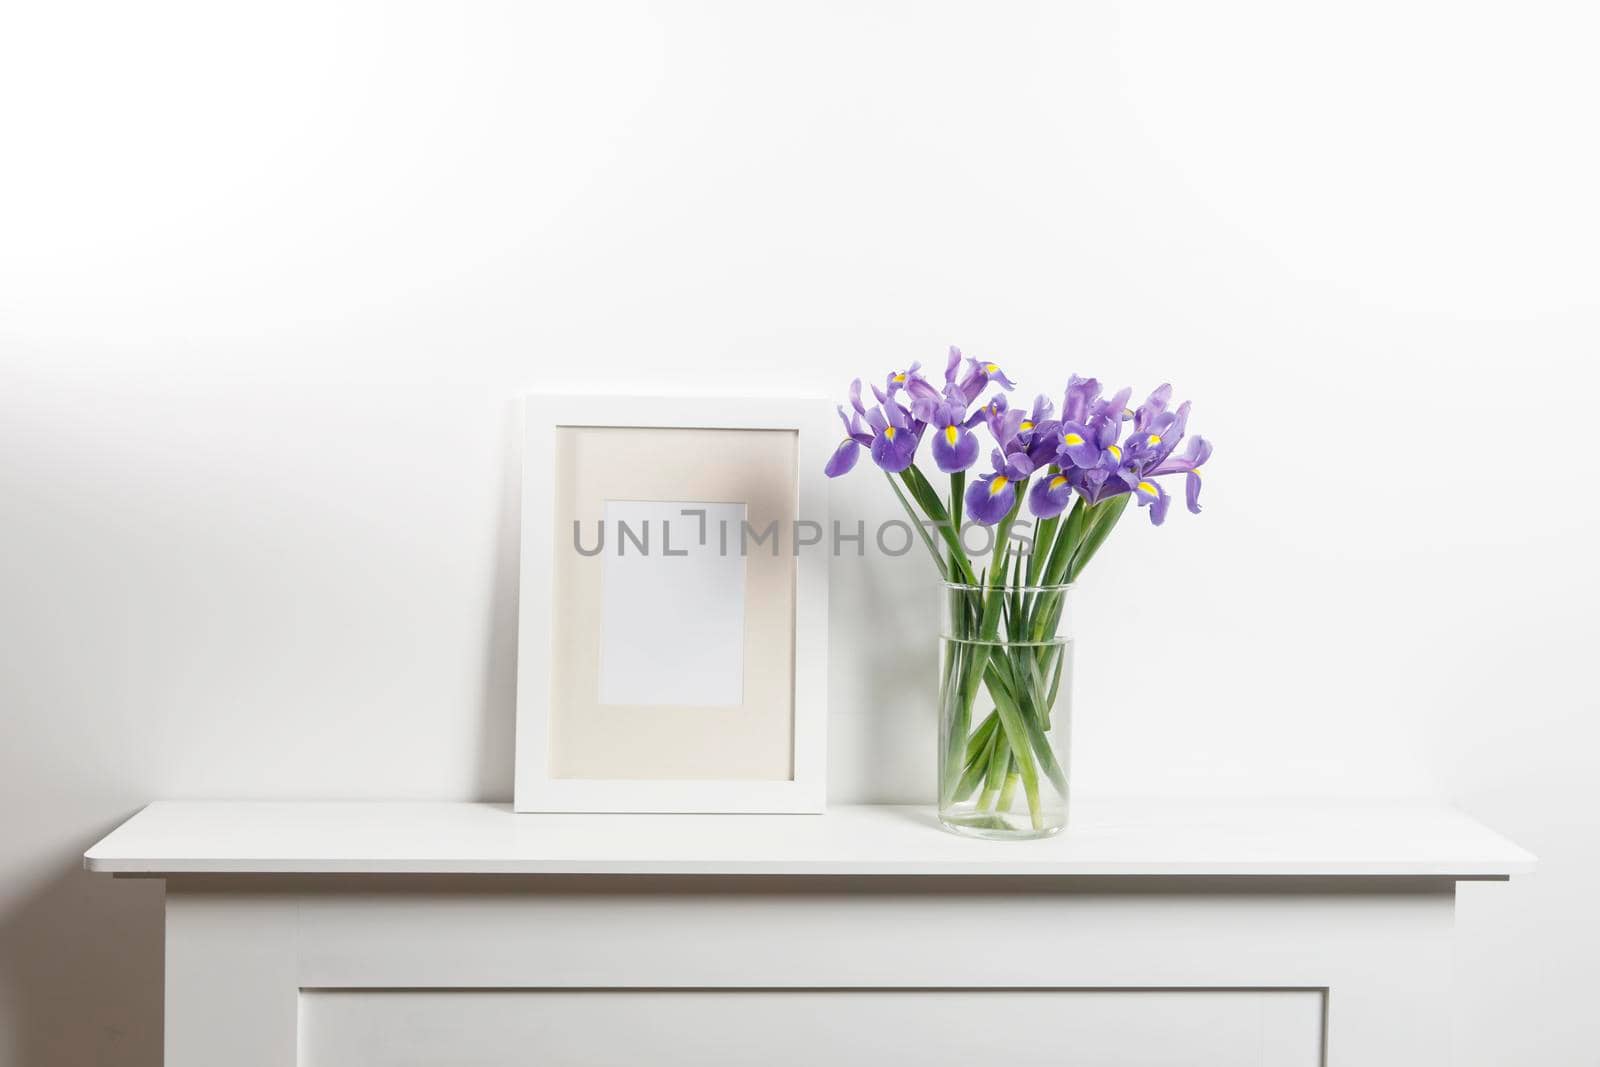 Bouquets of irises in a vase, photo frames on a chest of drawers